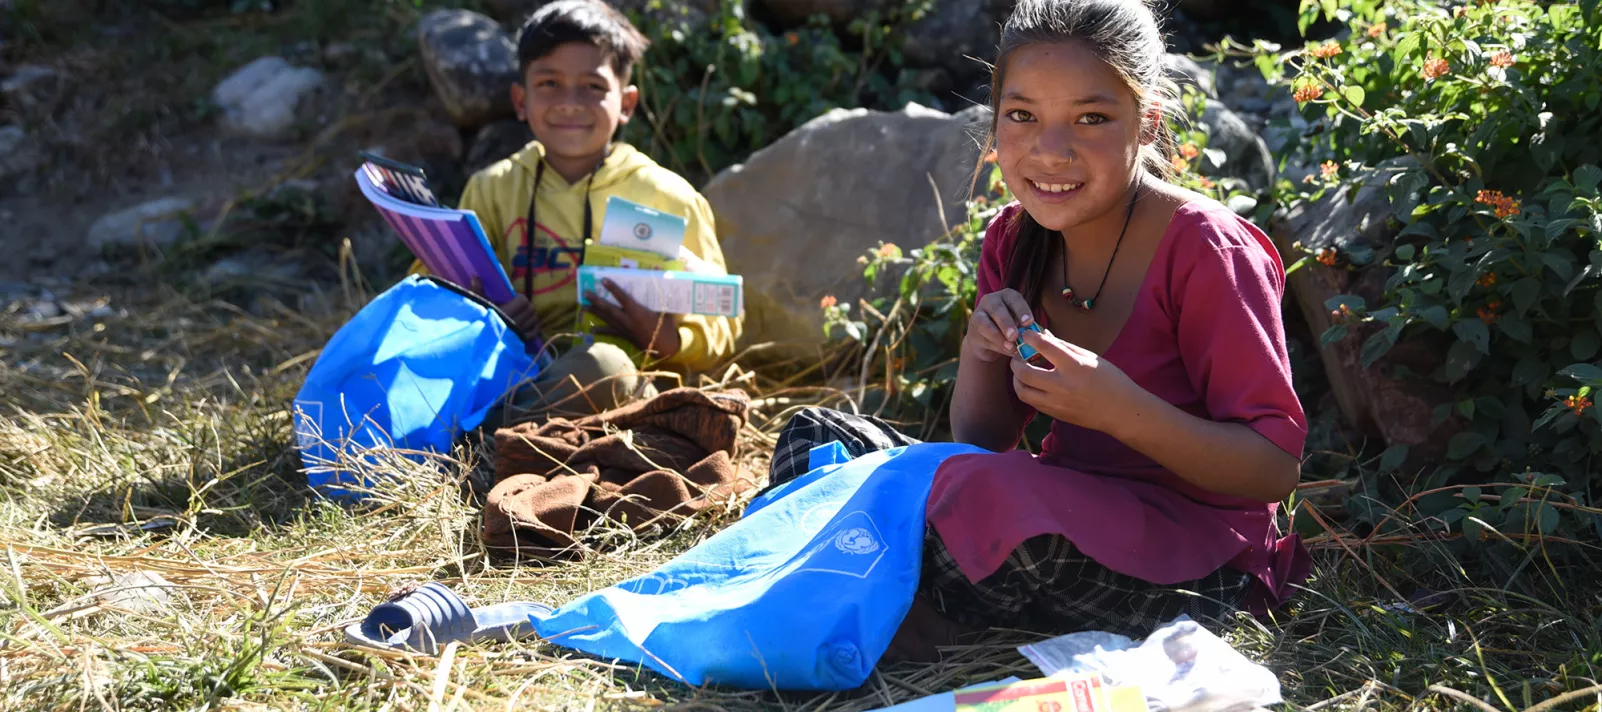 Children in Nepal with educational supplies